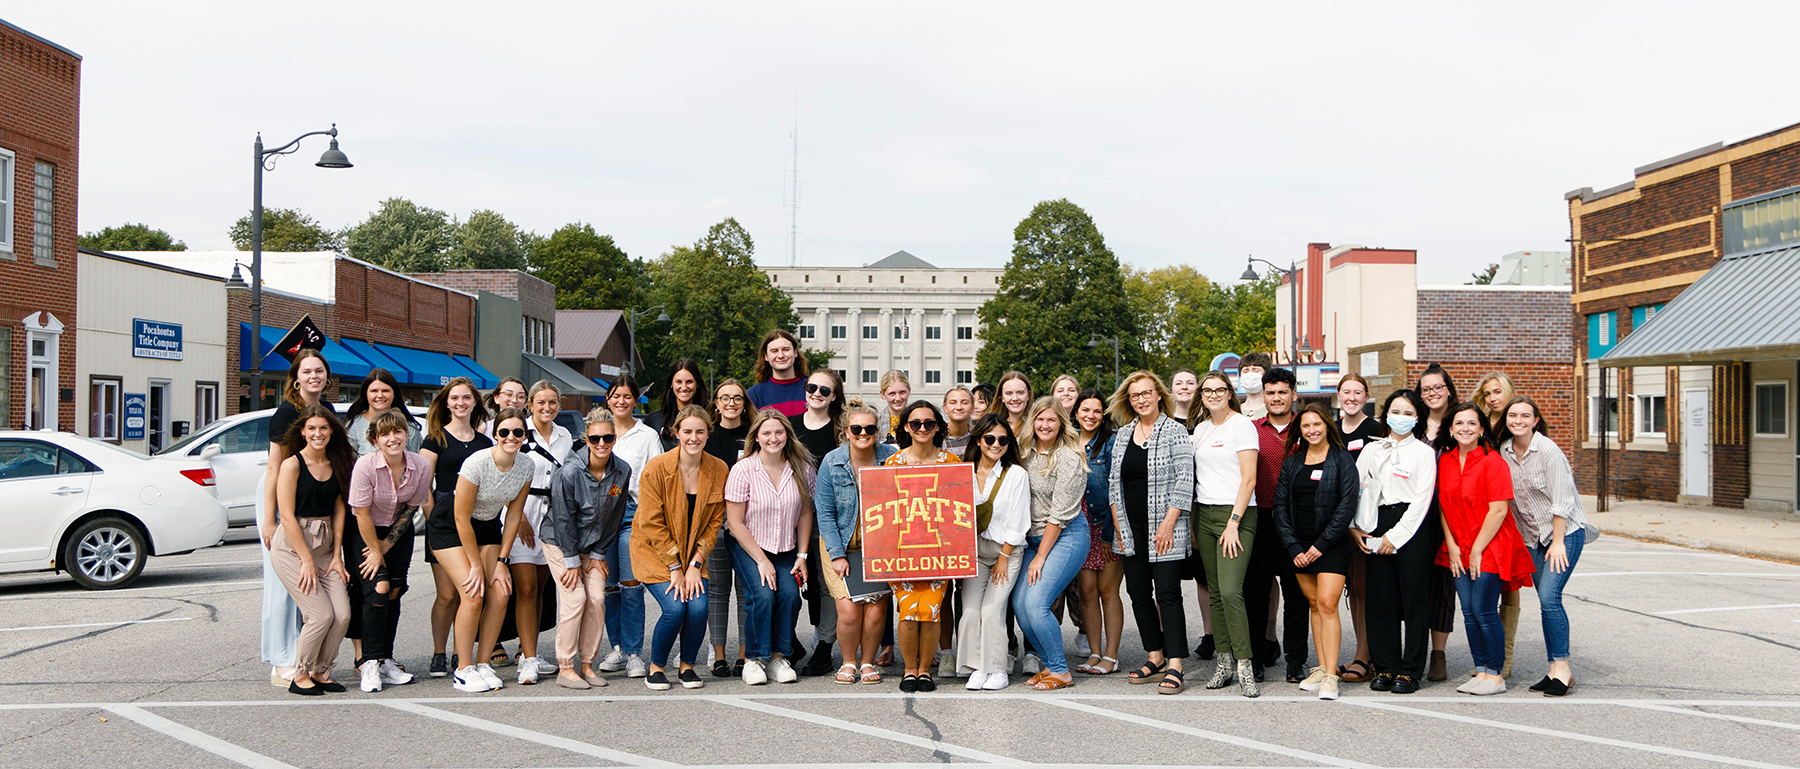 Linda Niehm’s “Entrepreneurship in Human Sciences” class in downtown Pocahontas in the fall of 2021. Photo by Ryan Riley.